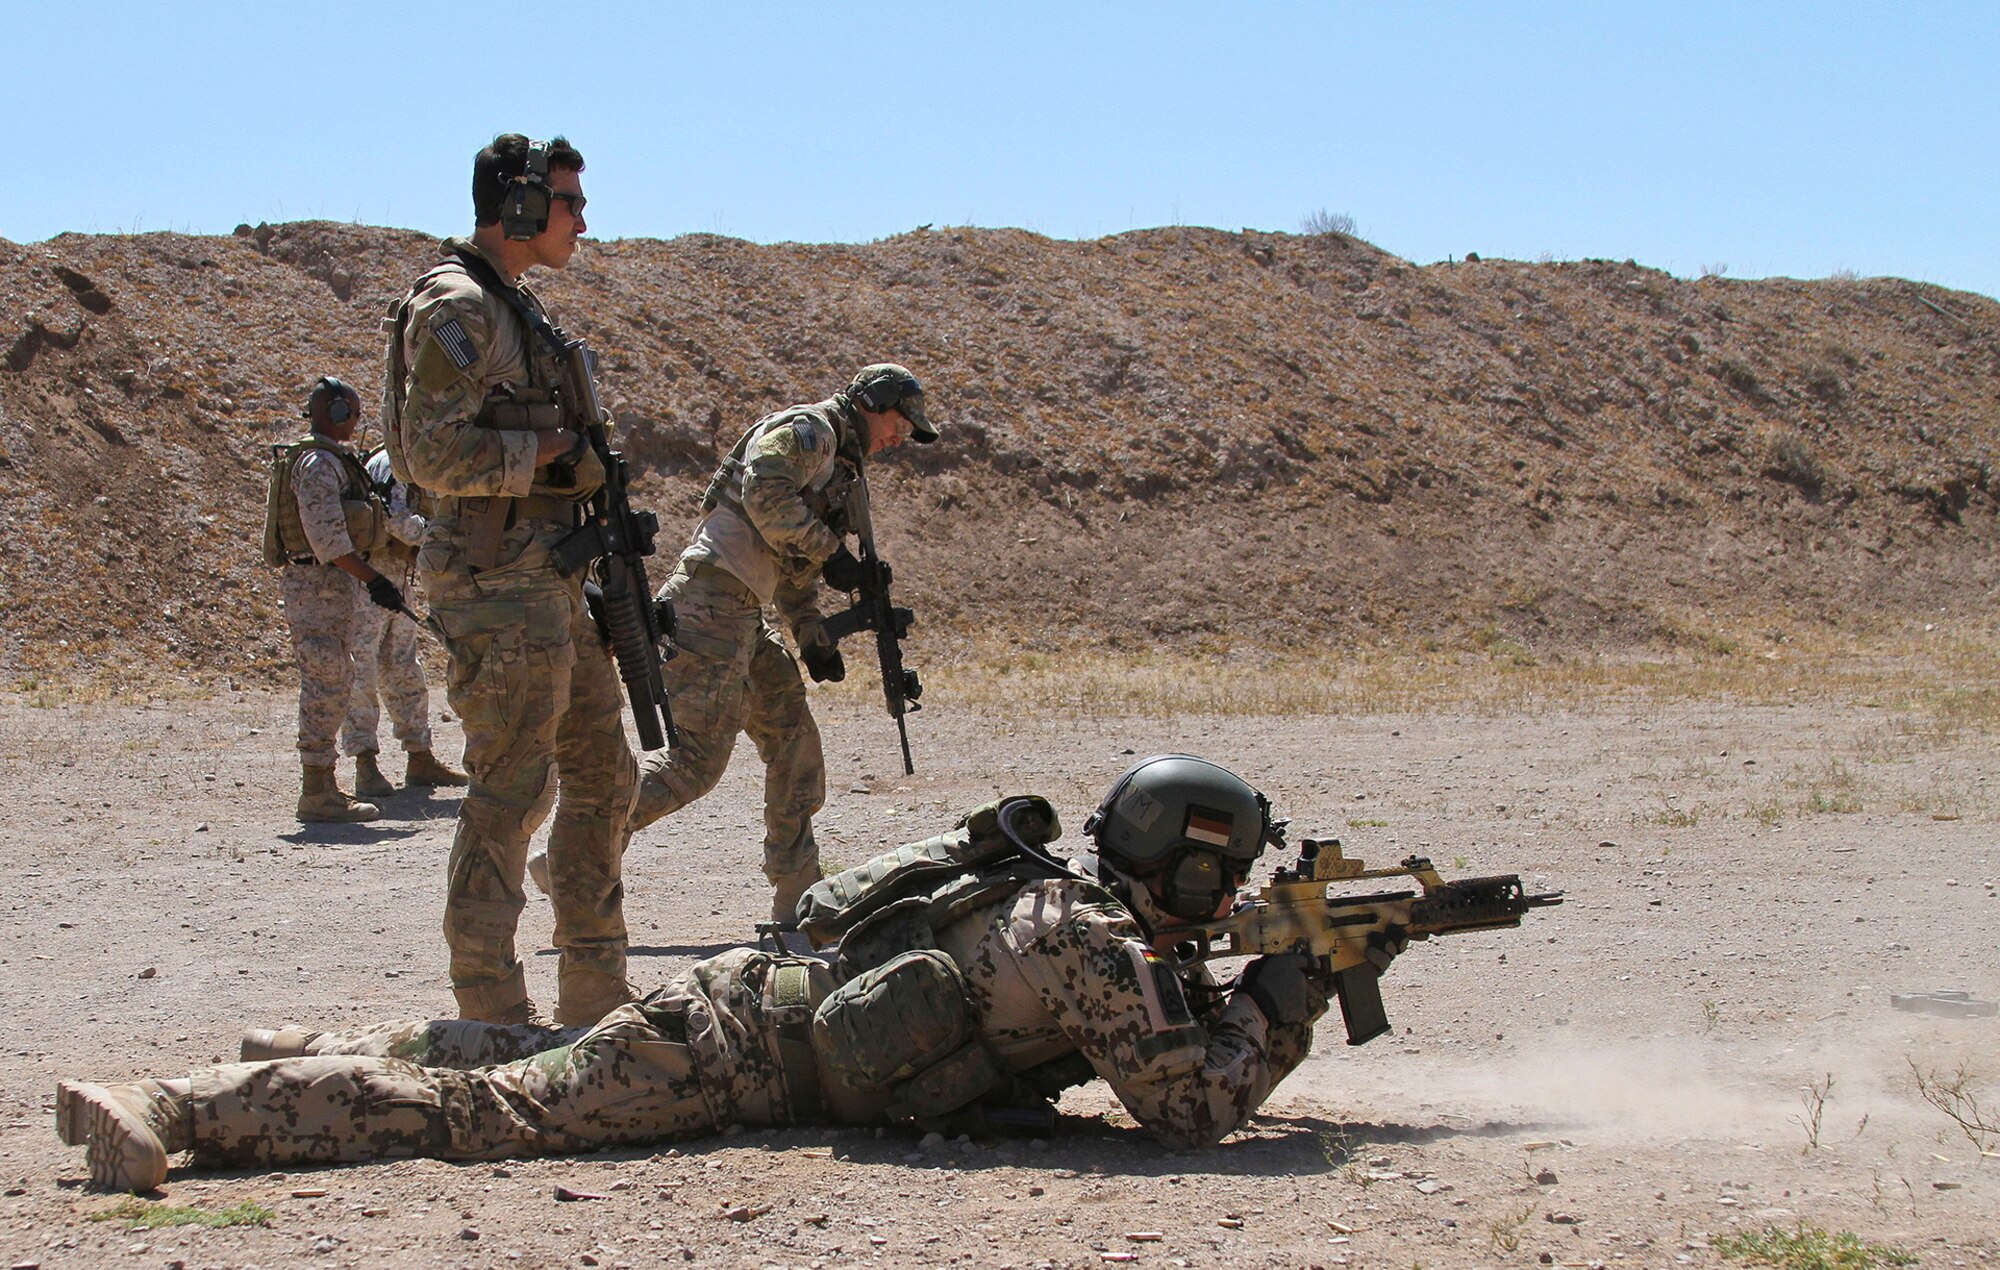 U.S. Airmen and Marines, along with German and Swedish Air Force Rangers, train together on various shooting tactics during Exercise ANGEL THUNDER at Three Points Firing Range in Tucson, Ariz., May 12, 2014.  ANGEL THUNDER is the only exercise in the Department of Defense covering personnel recovery training across the full spectrum of irregular and conventional warfare and has become the world’s largest and most complex personnel recovery exercise. Through the use of joint training, members are able to hone their development of the four core functions of personnel recovery which include preparing, planning, execution, and adaptation. ANGEL THUNDER is designed to provide state of the art rescue training for the total Air Force rescue community, as well as Joint U.S. Military, federal government agencies, local communities, non-governmental agencies and allied nations.  (U.S. Air Force photo by Tech. Sgt. Heather R. Redman/Released)